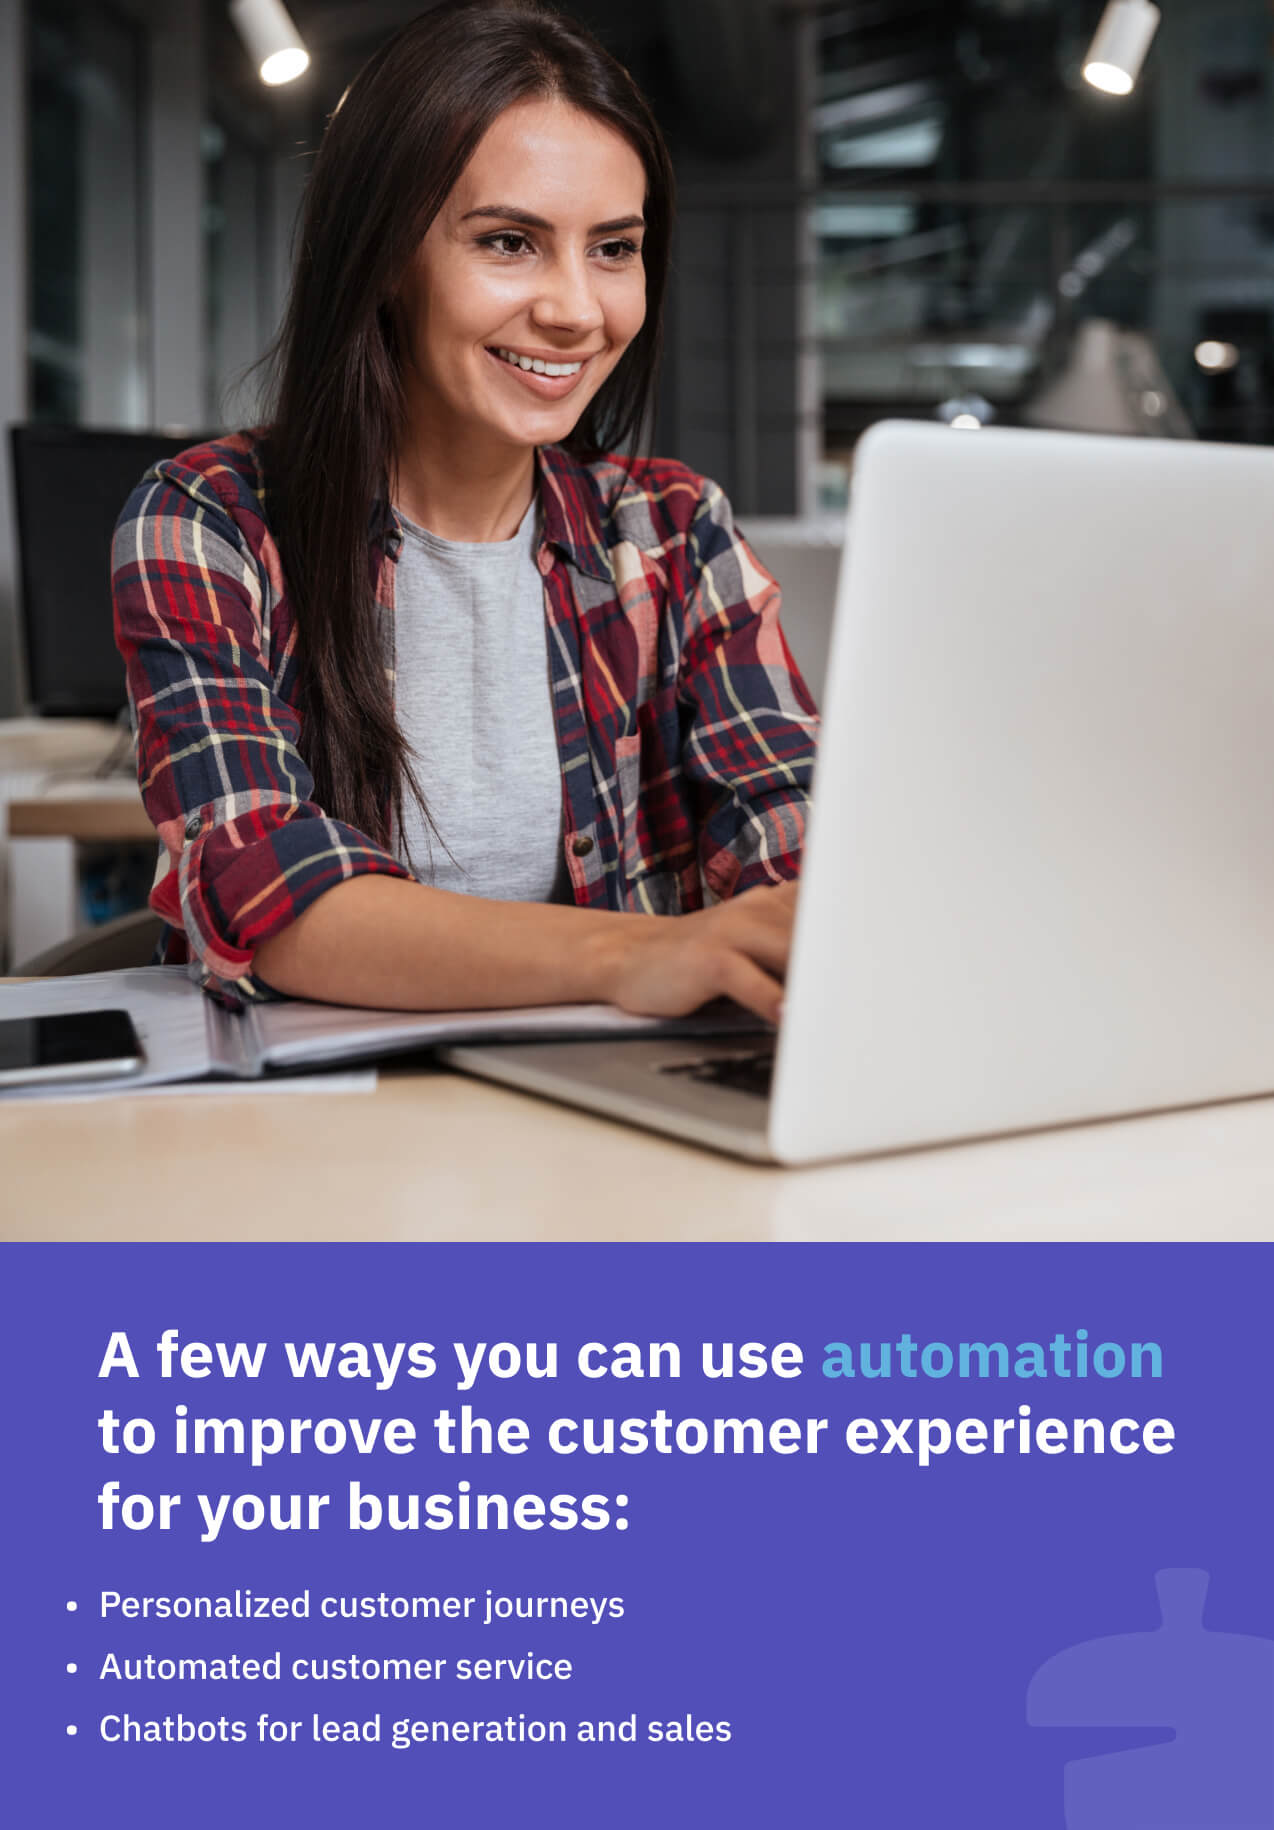 Using automation to improve the customer experience